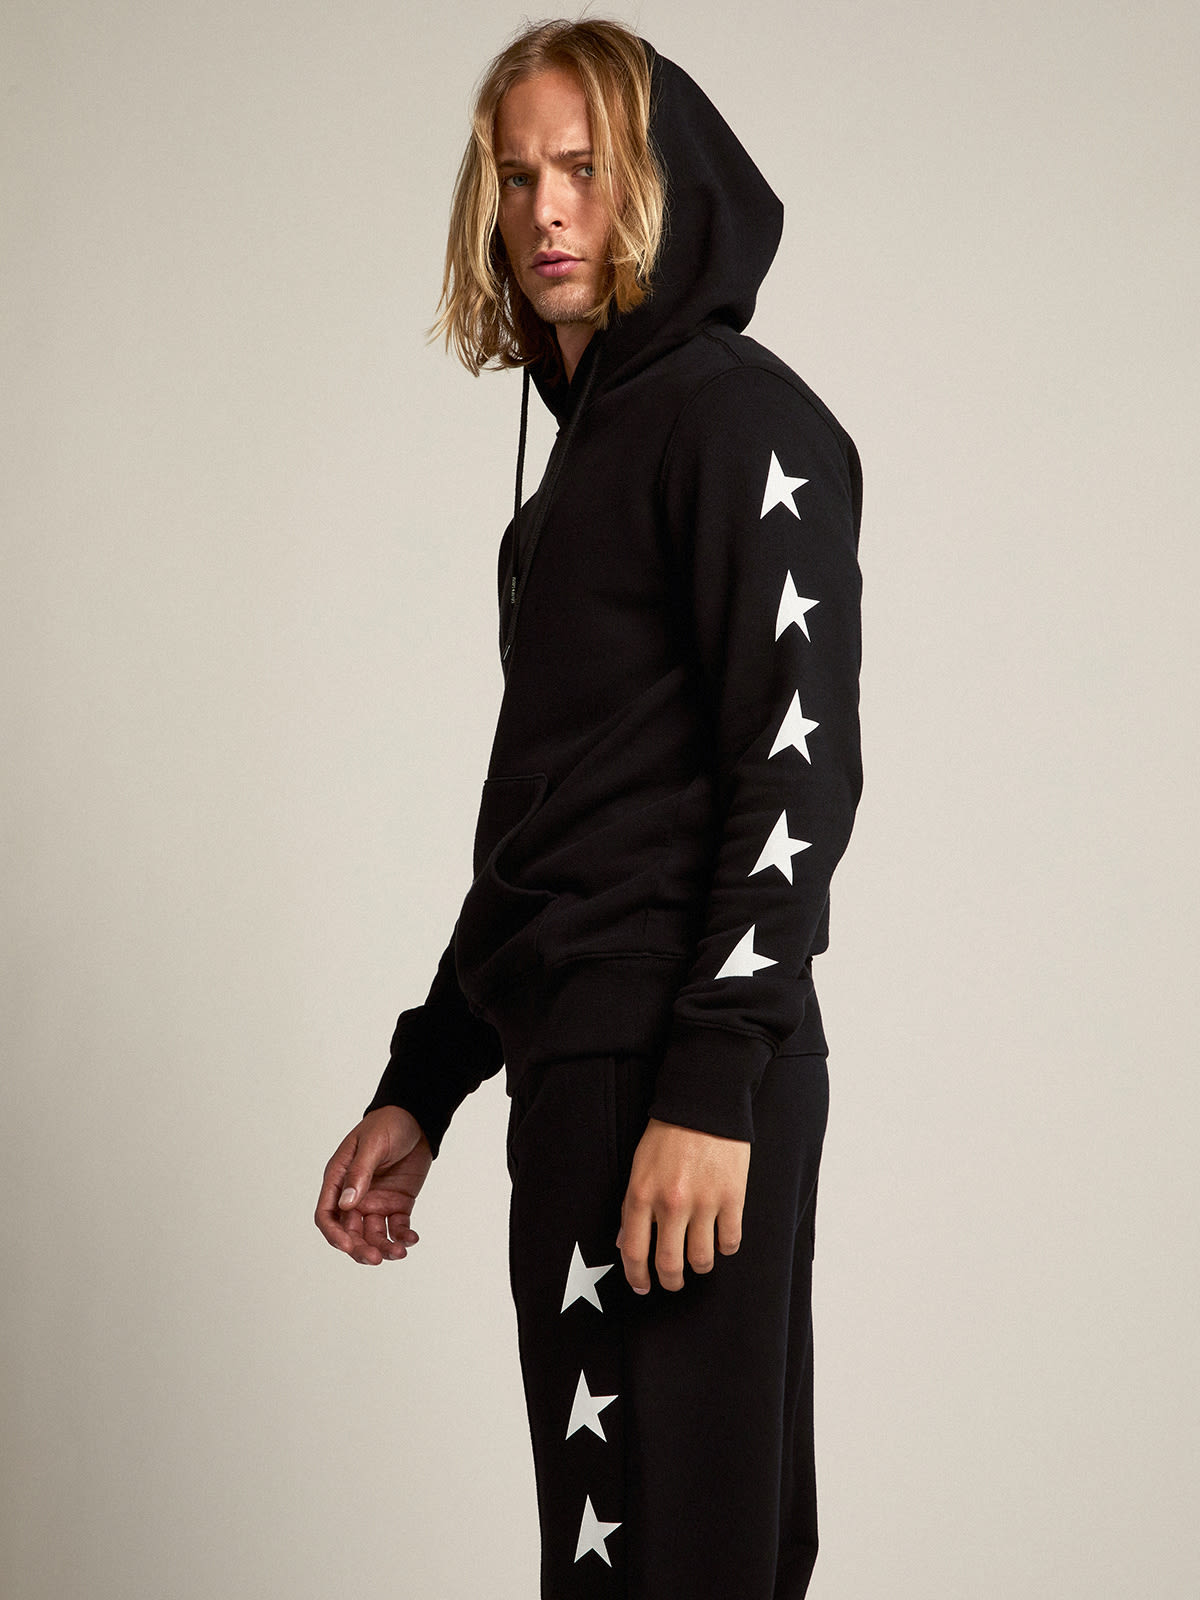 Black Alighiero Star Collection sweatshirt with contrasting white